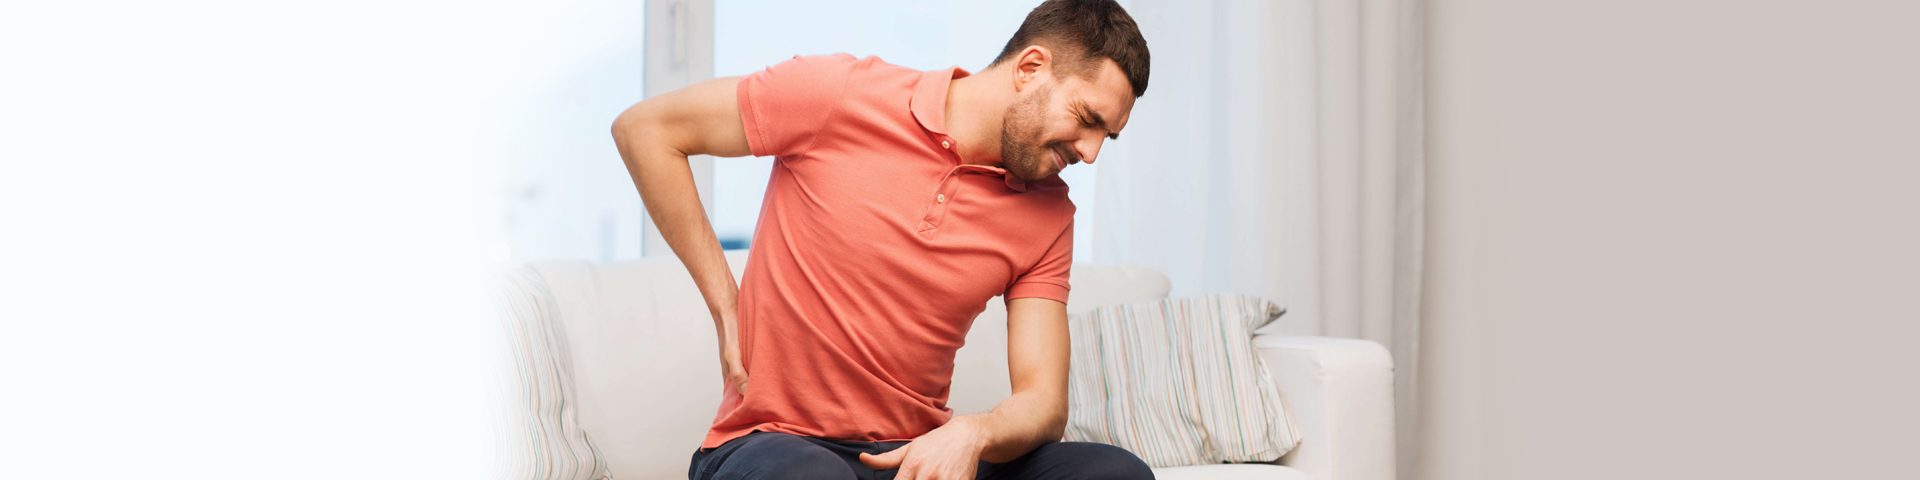 How do Chiropractors help with Treatments for Lower Back Pain?